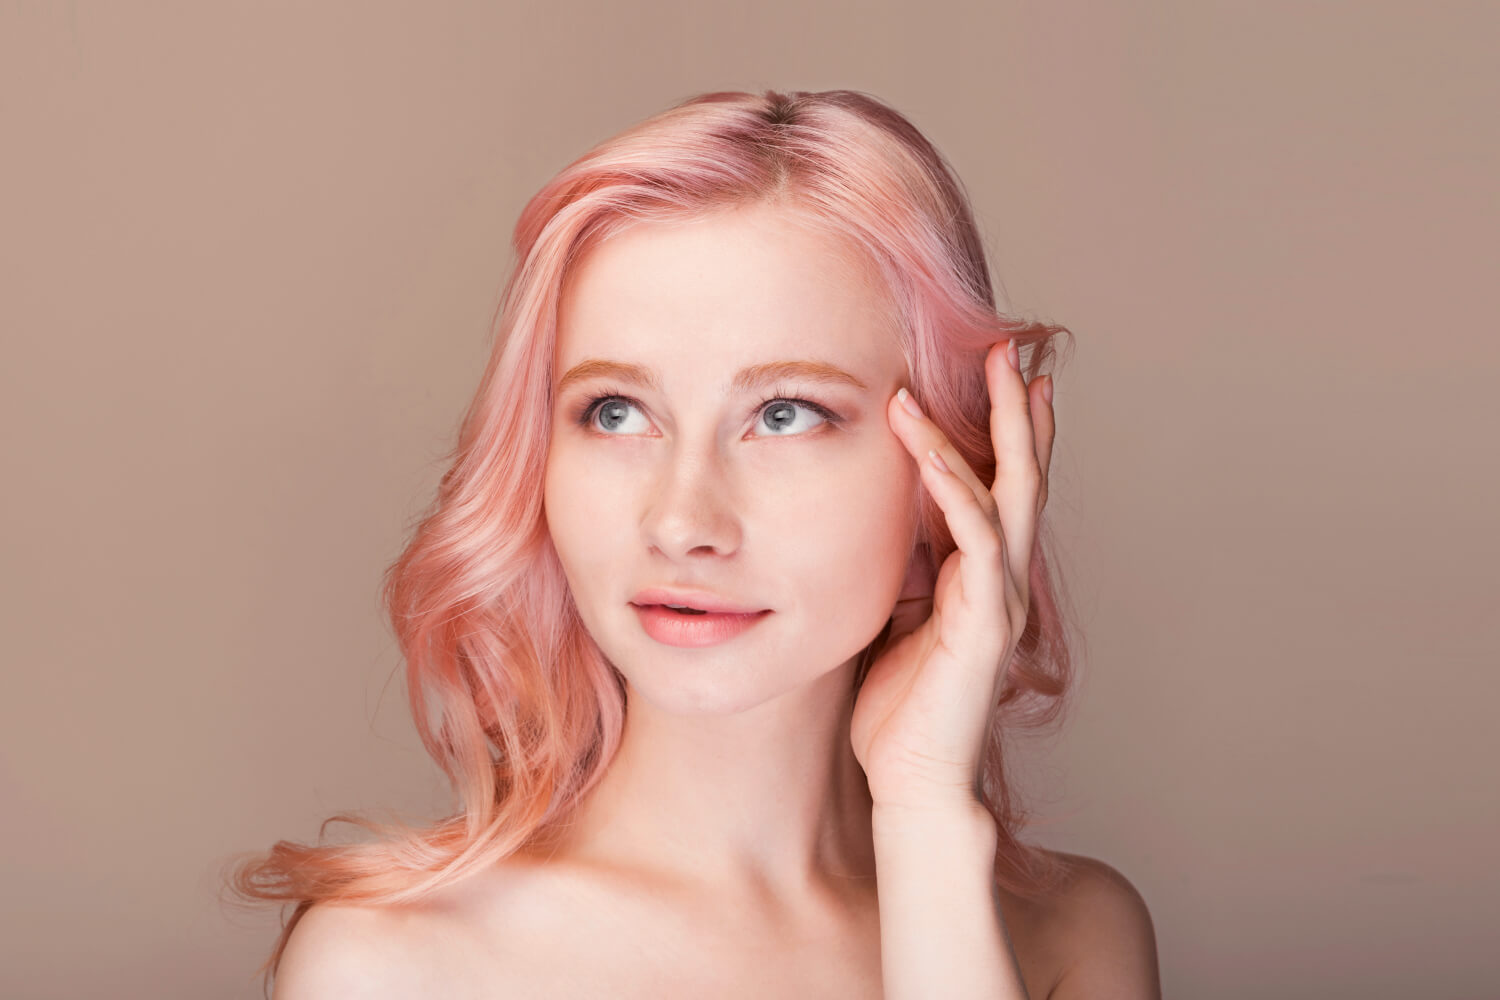 Here’s How to Make Your Hair Color Last Longer